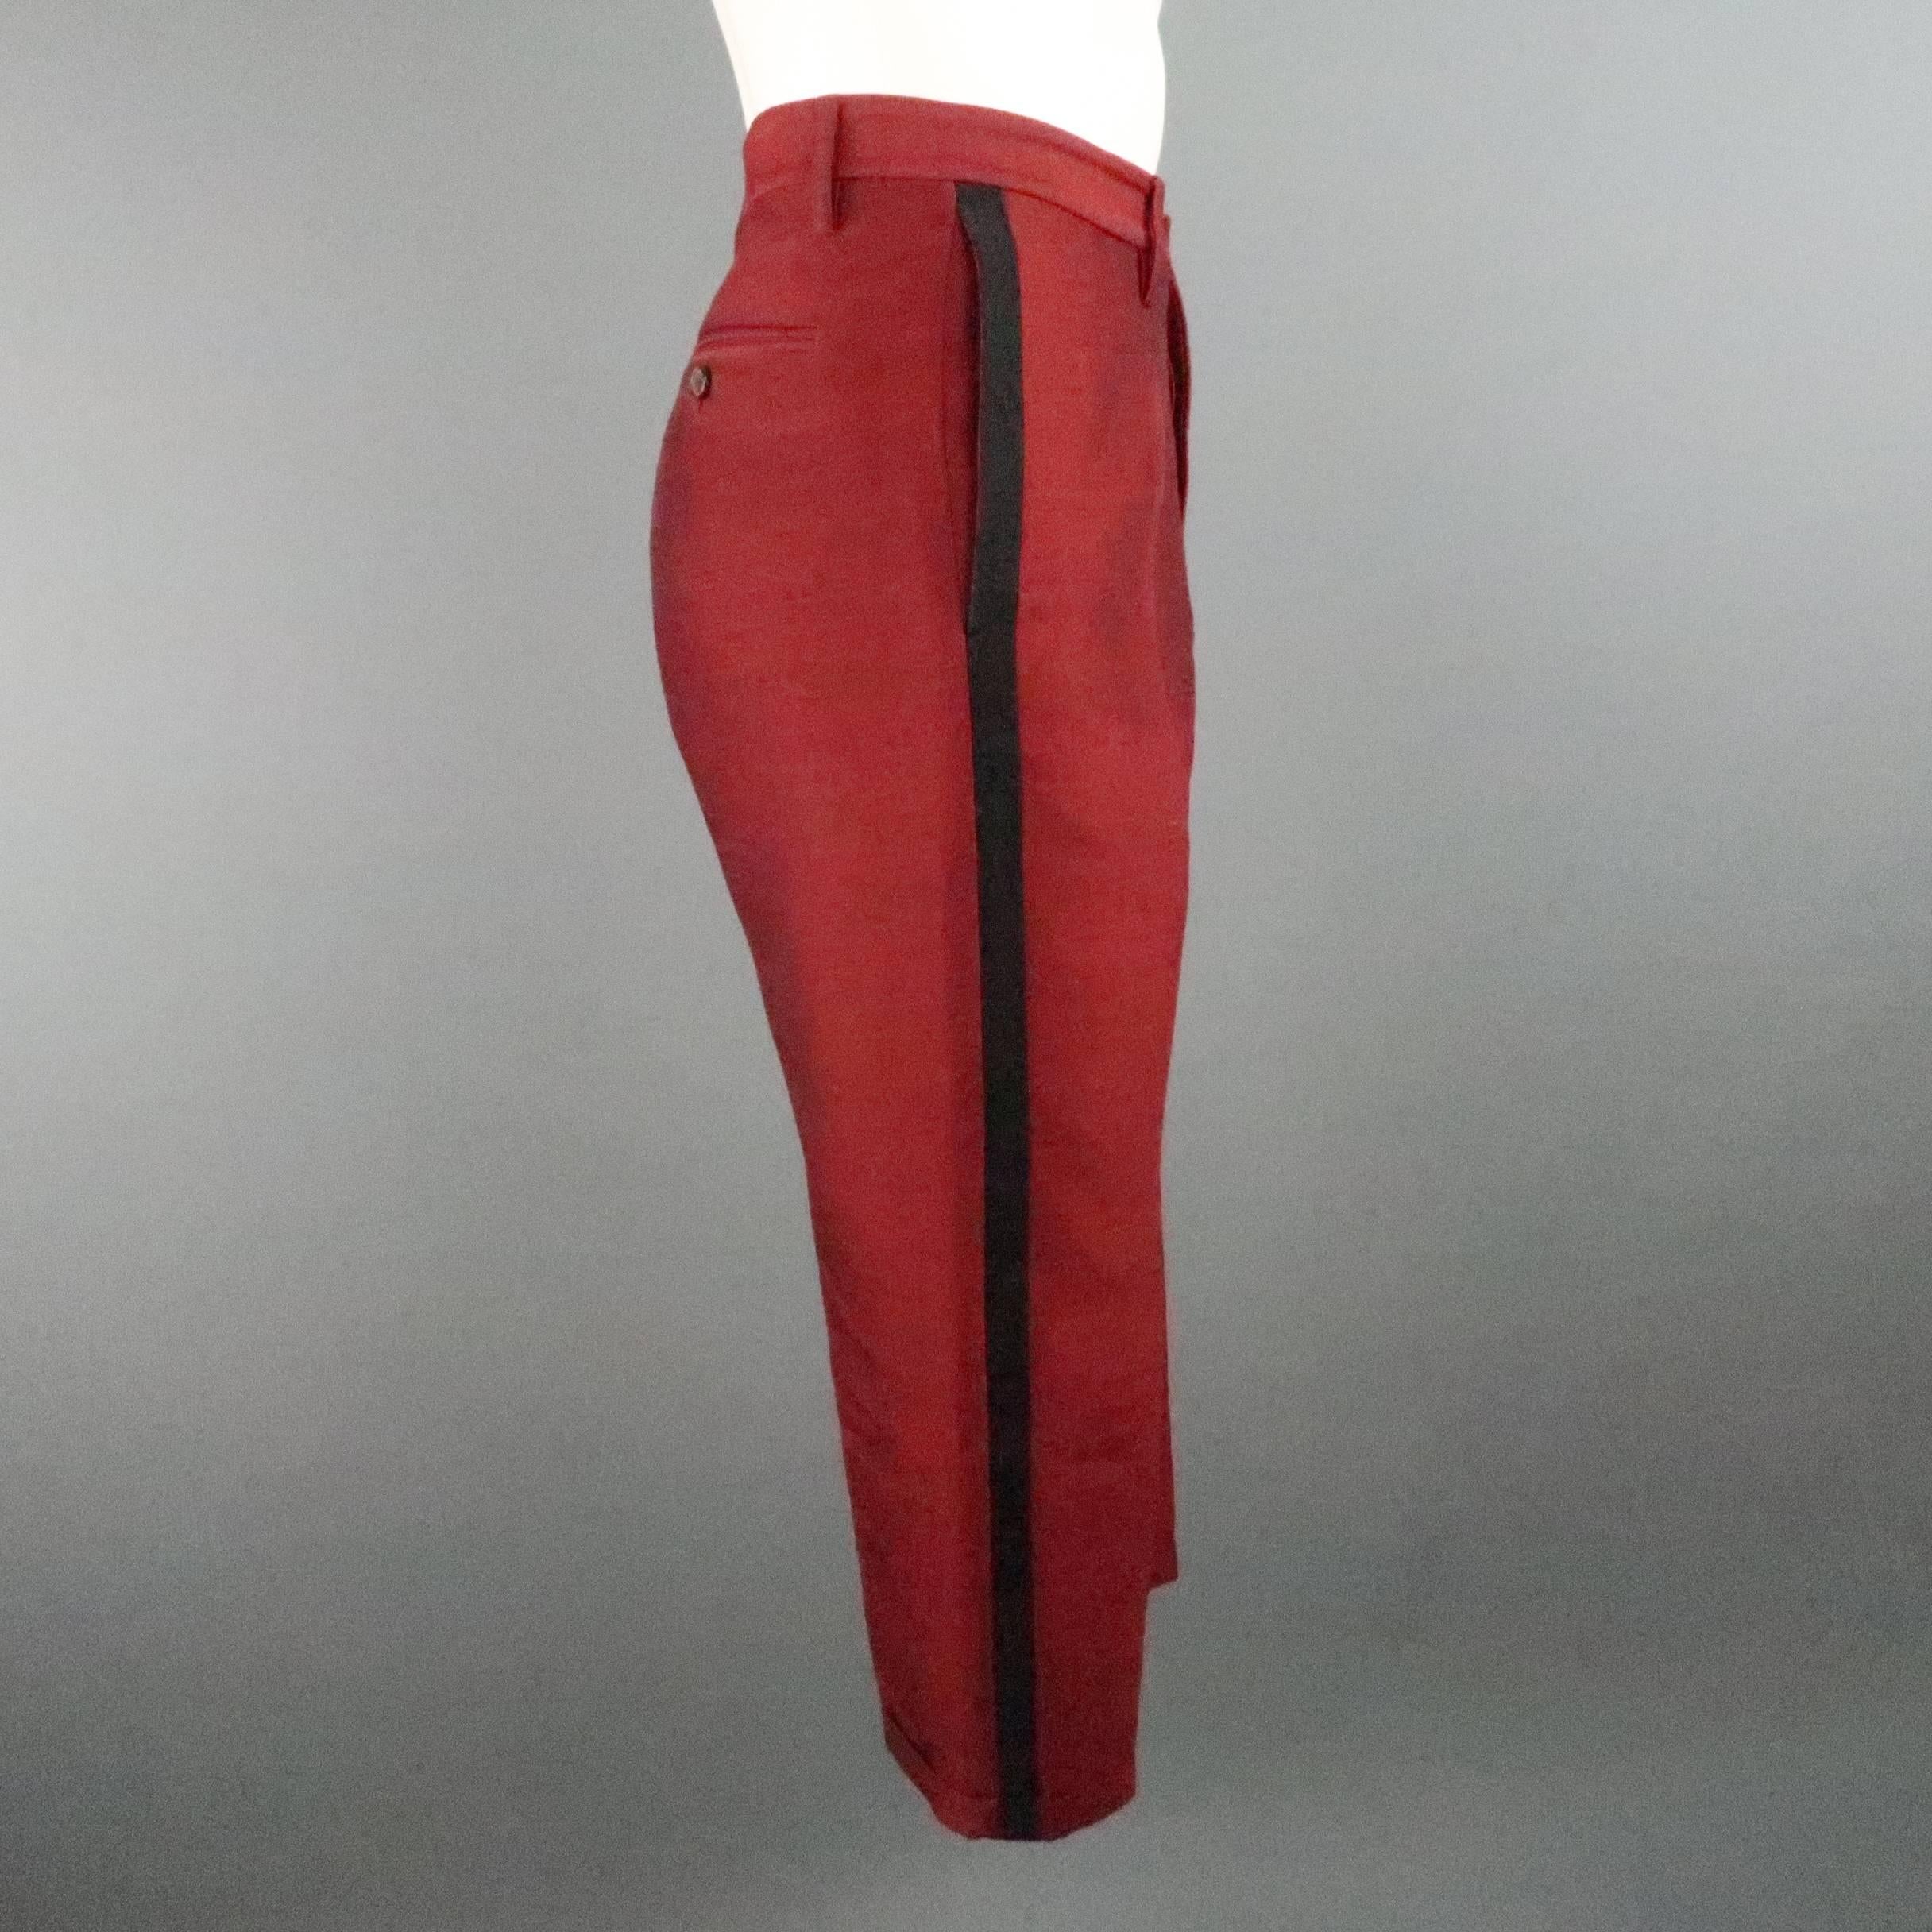 DSQUARED2 tuxedo pants come in a dark red heathered wool silk blend with a subtle sheen and feature a cropped hem with cuff, black tuxedo stripe, and extended back loop. Made in Italy.
 
Excellent Pre-Owned Condition.
Marked: IT 48
 
Measurements:
